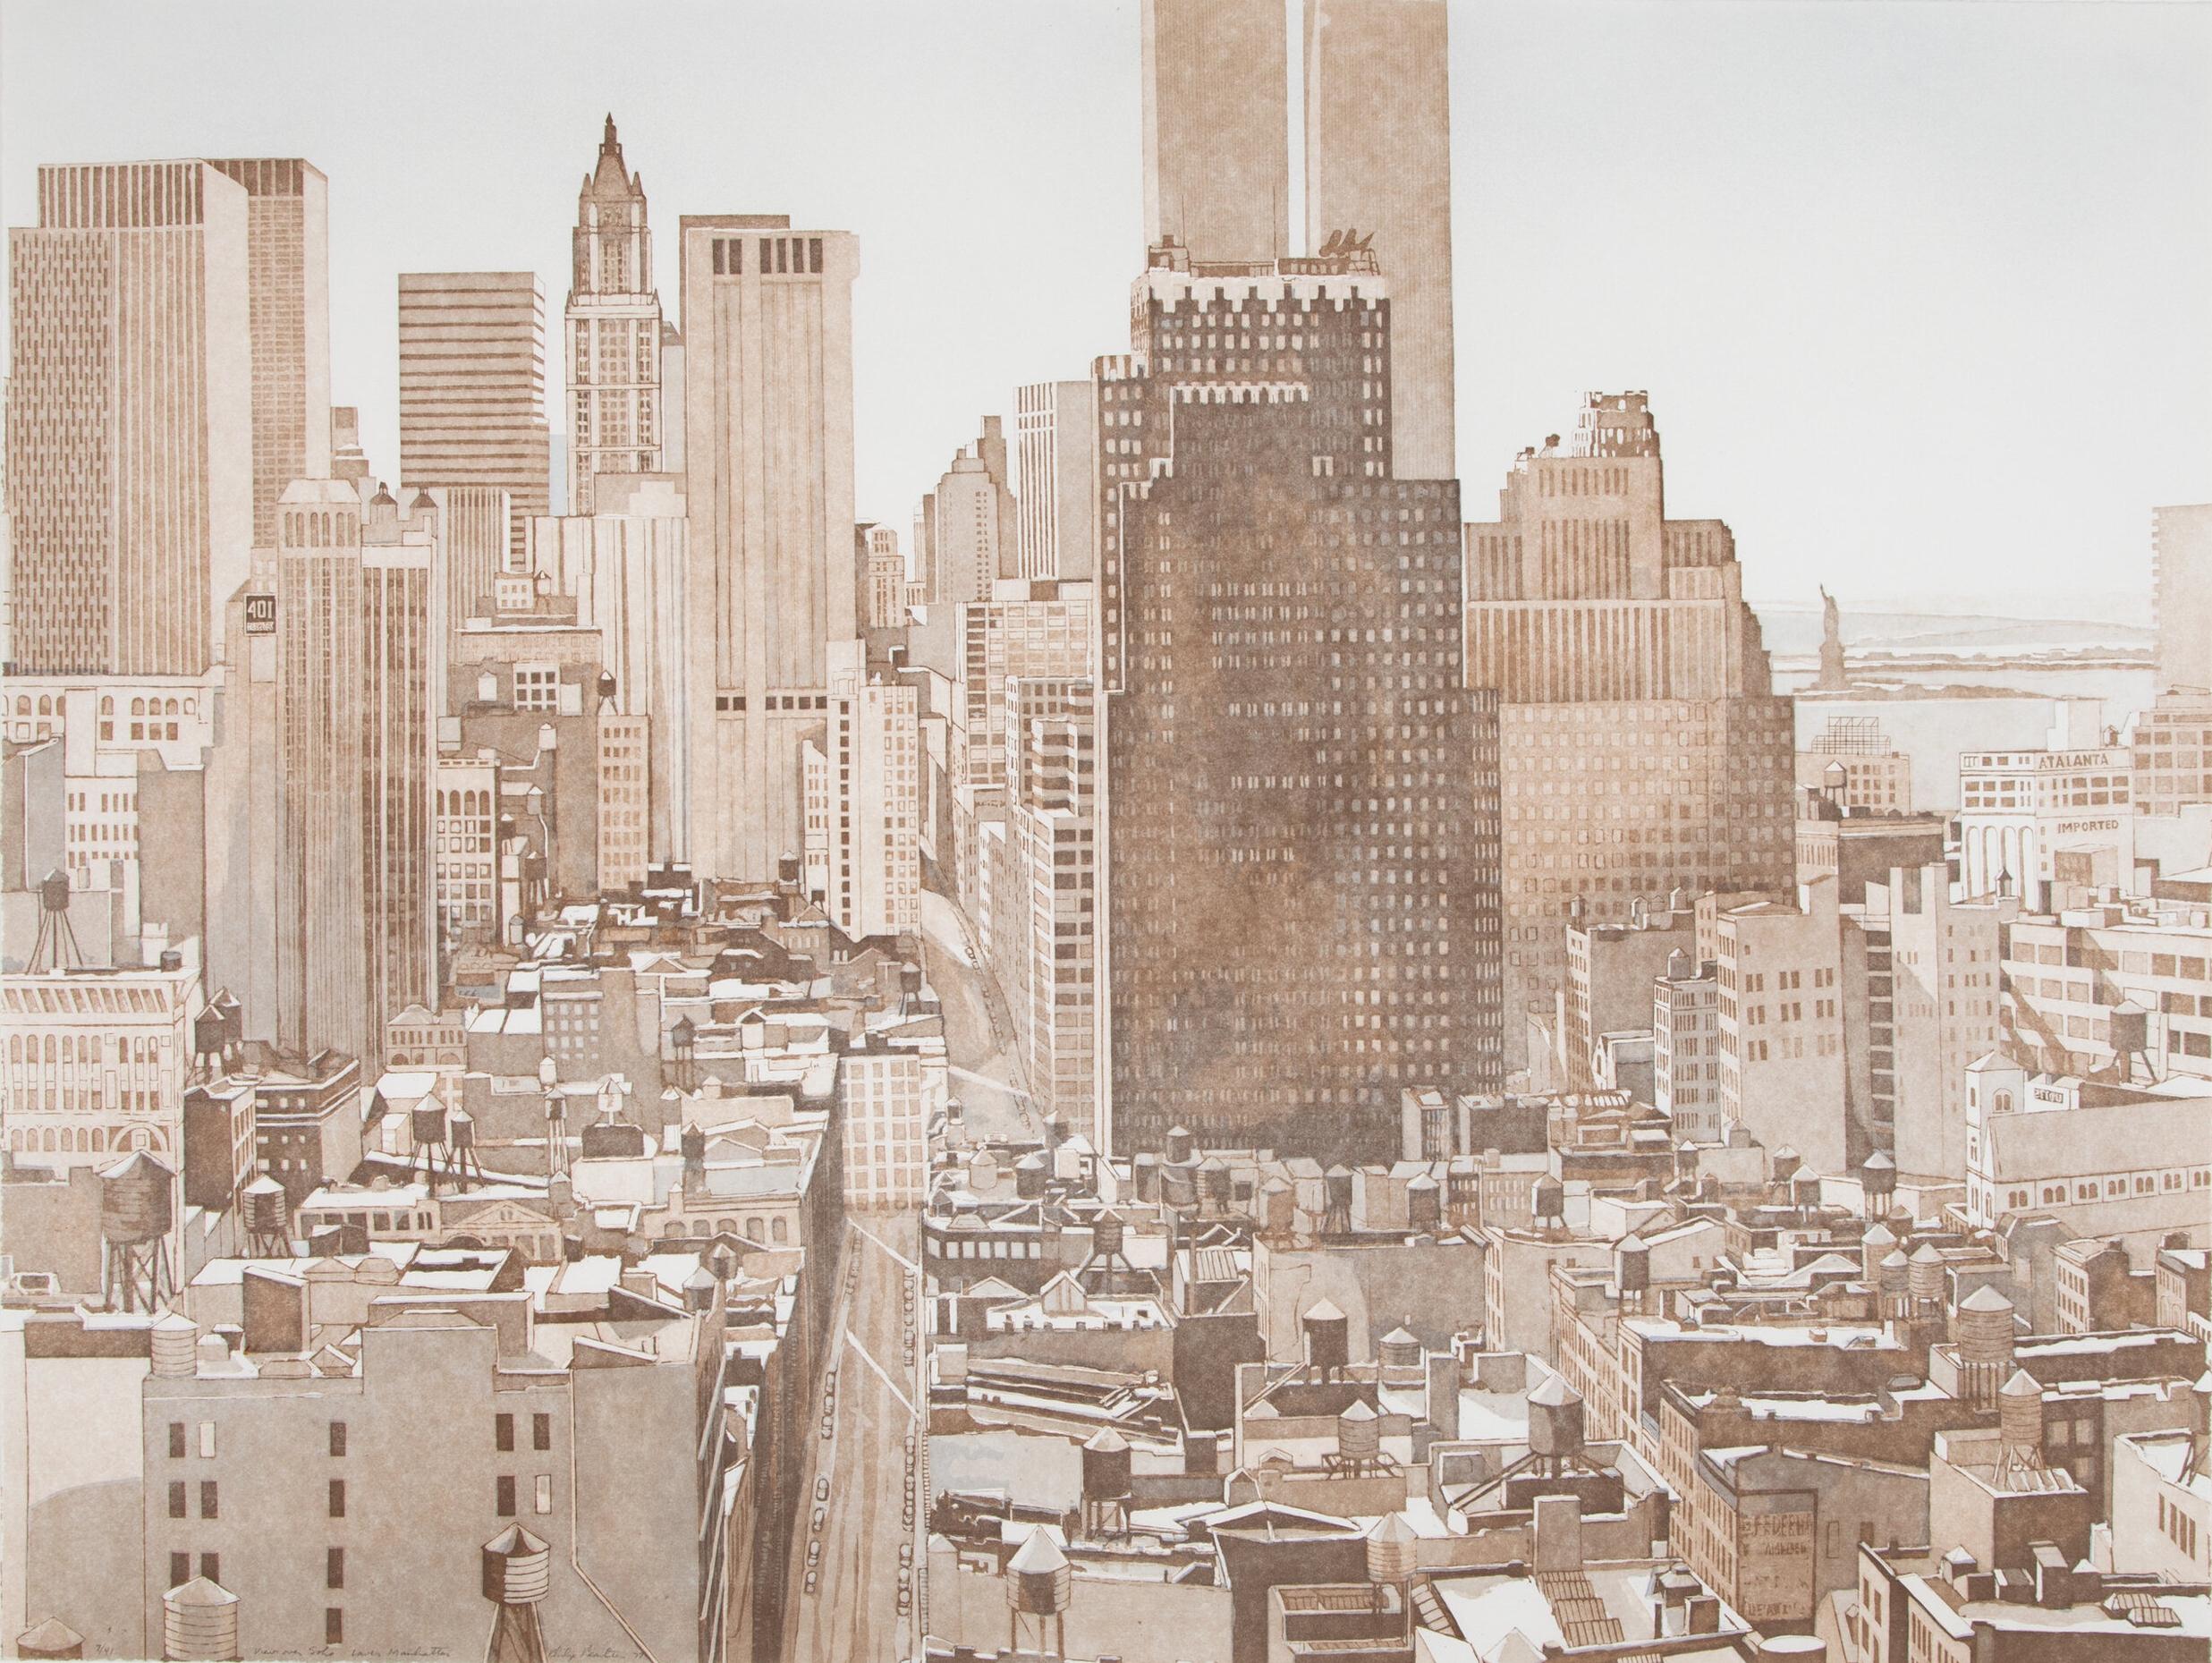 Philip Pearlstein (1924-2022)
View Over Soho, Lower Manhattan, 1977
Aquatint in colors on wove paper
Edition 7/41
Signed, editioned and titled in pencil lower left
Printed by the Orlando Condeso Workshop, New York.
Co-published by the artist and